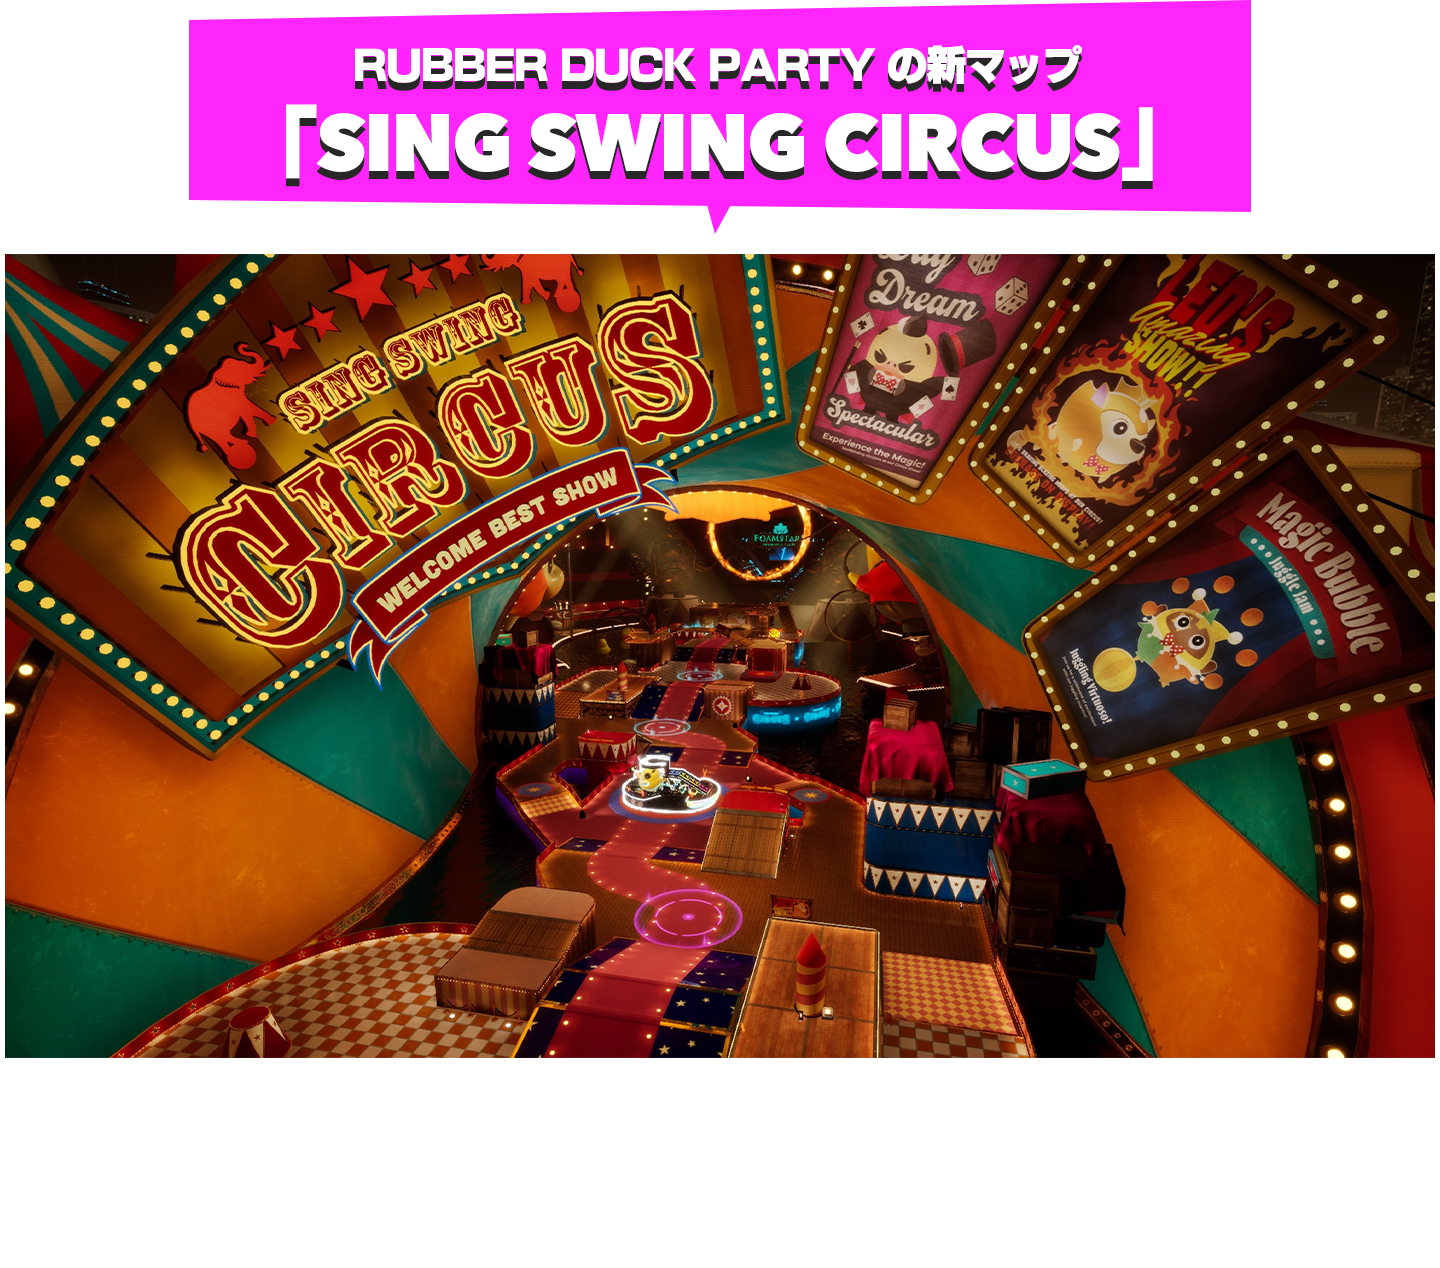 RUBBER DUCK PARTY の新マップ「SING SWING CIRCUS」